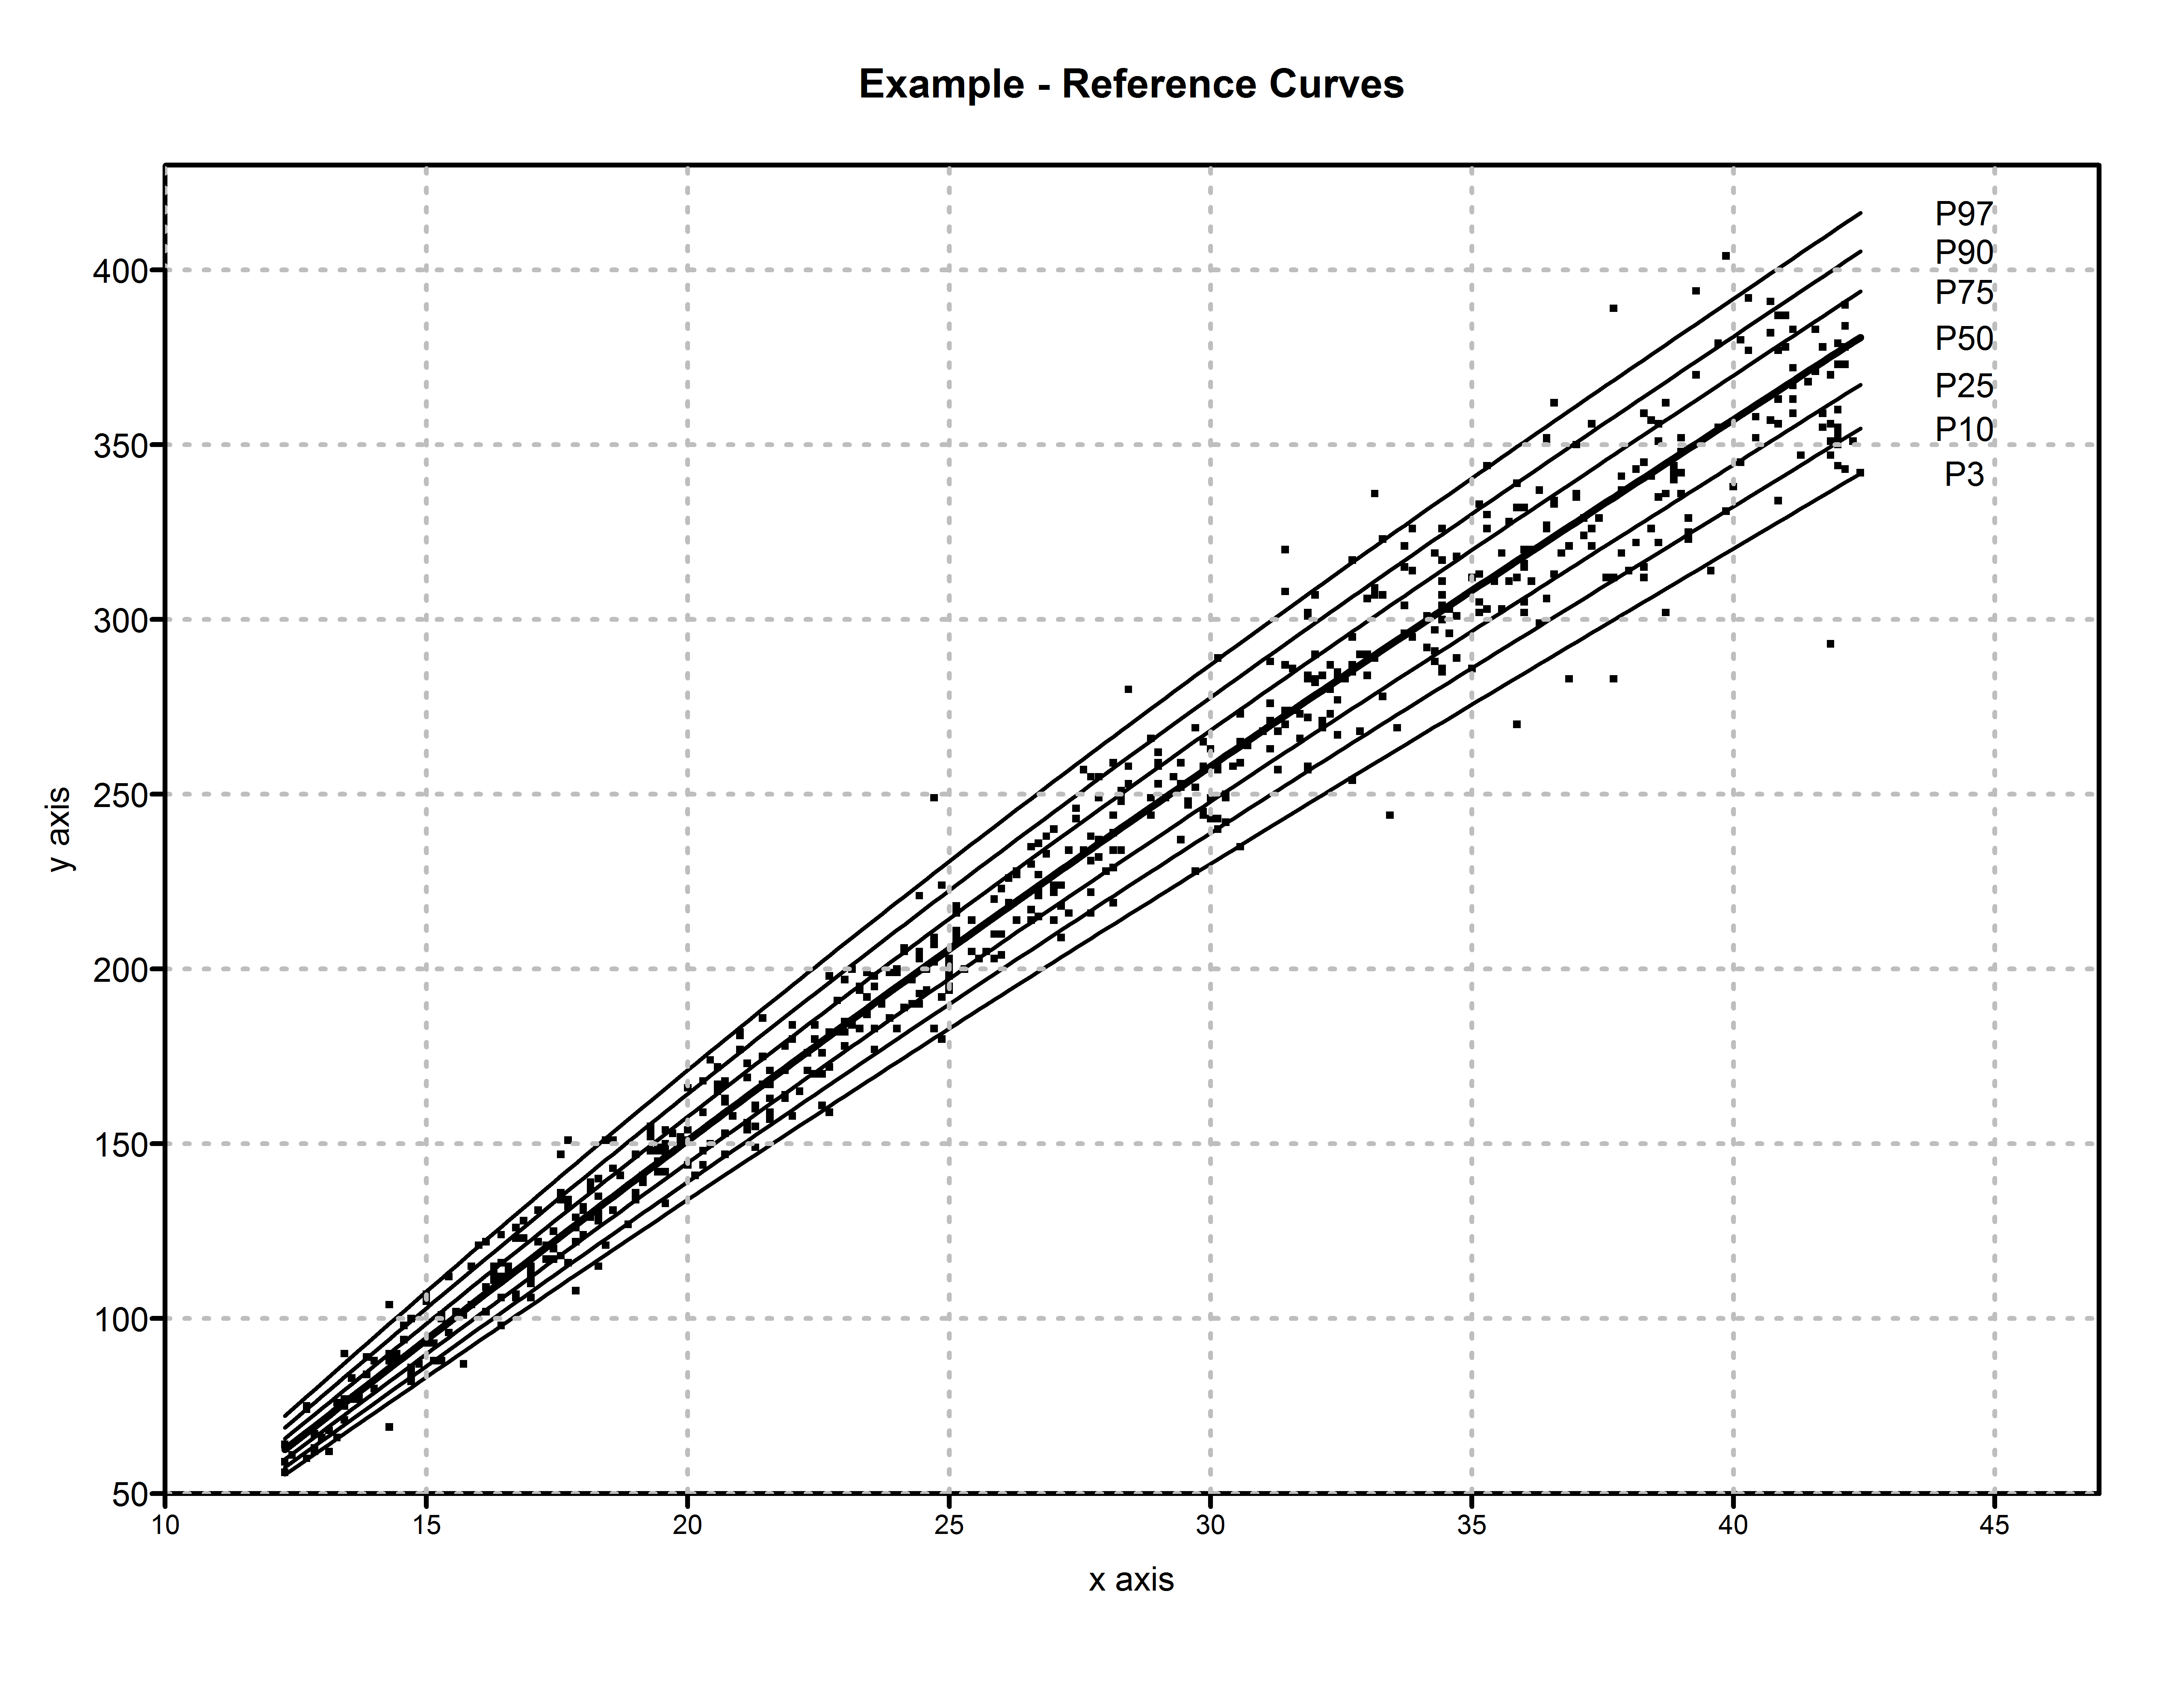 Example reference curves